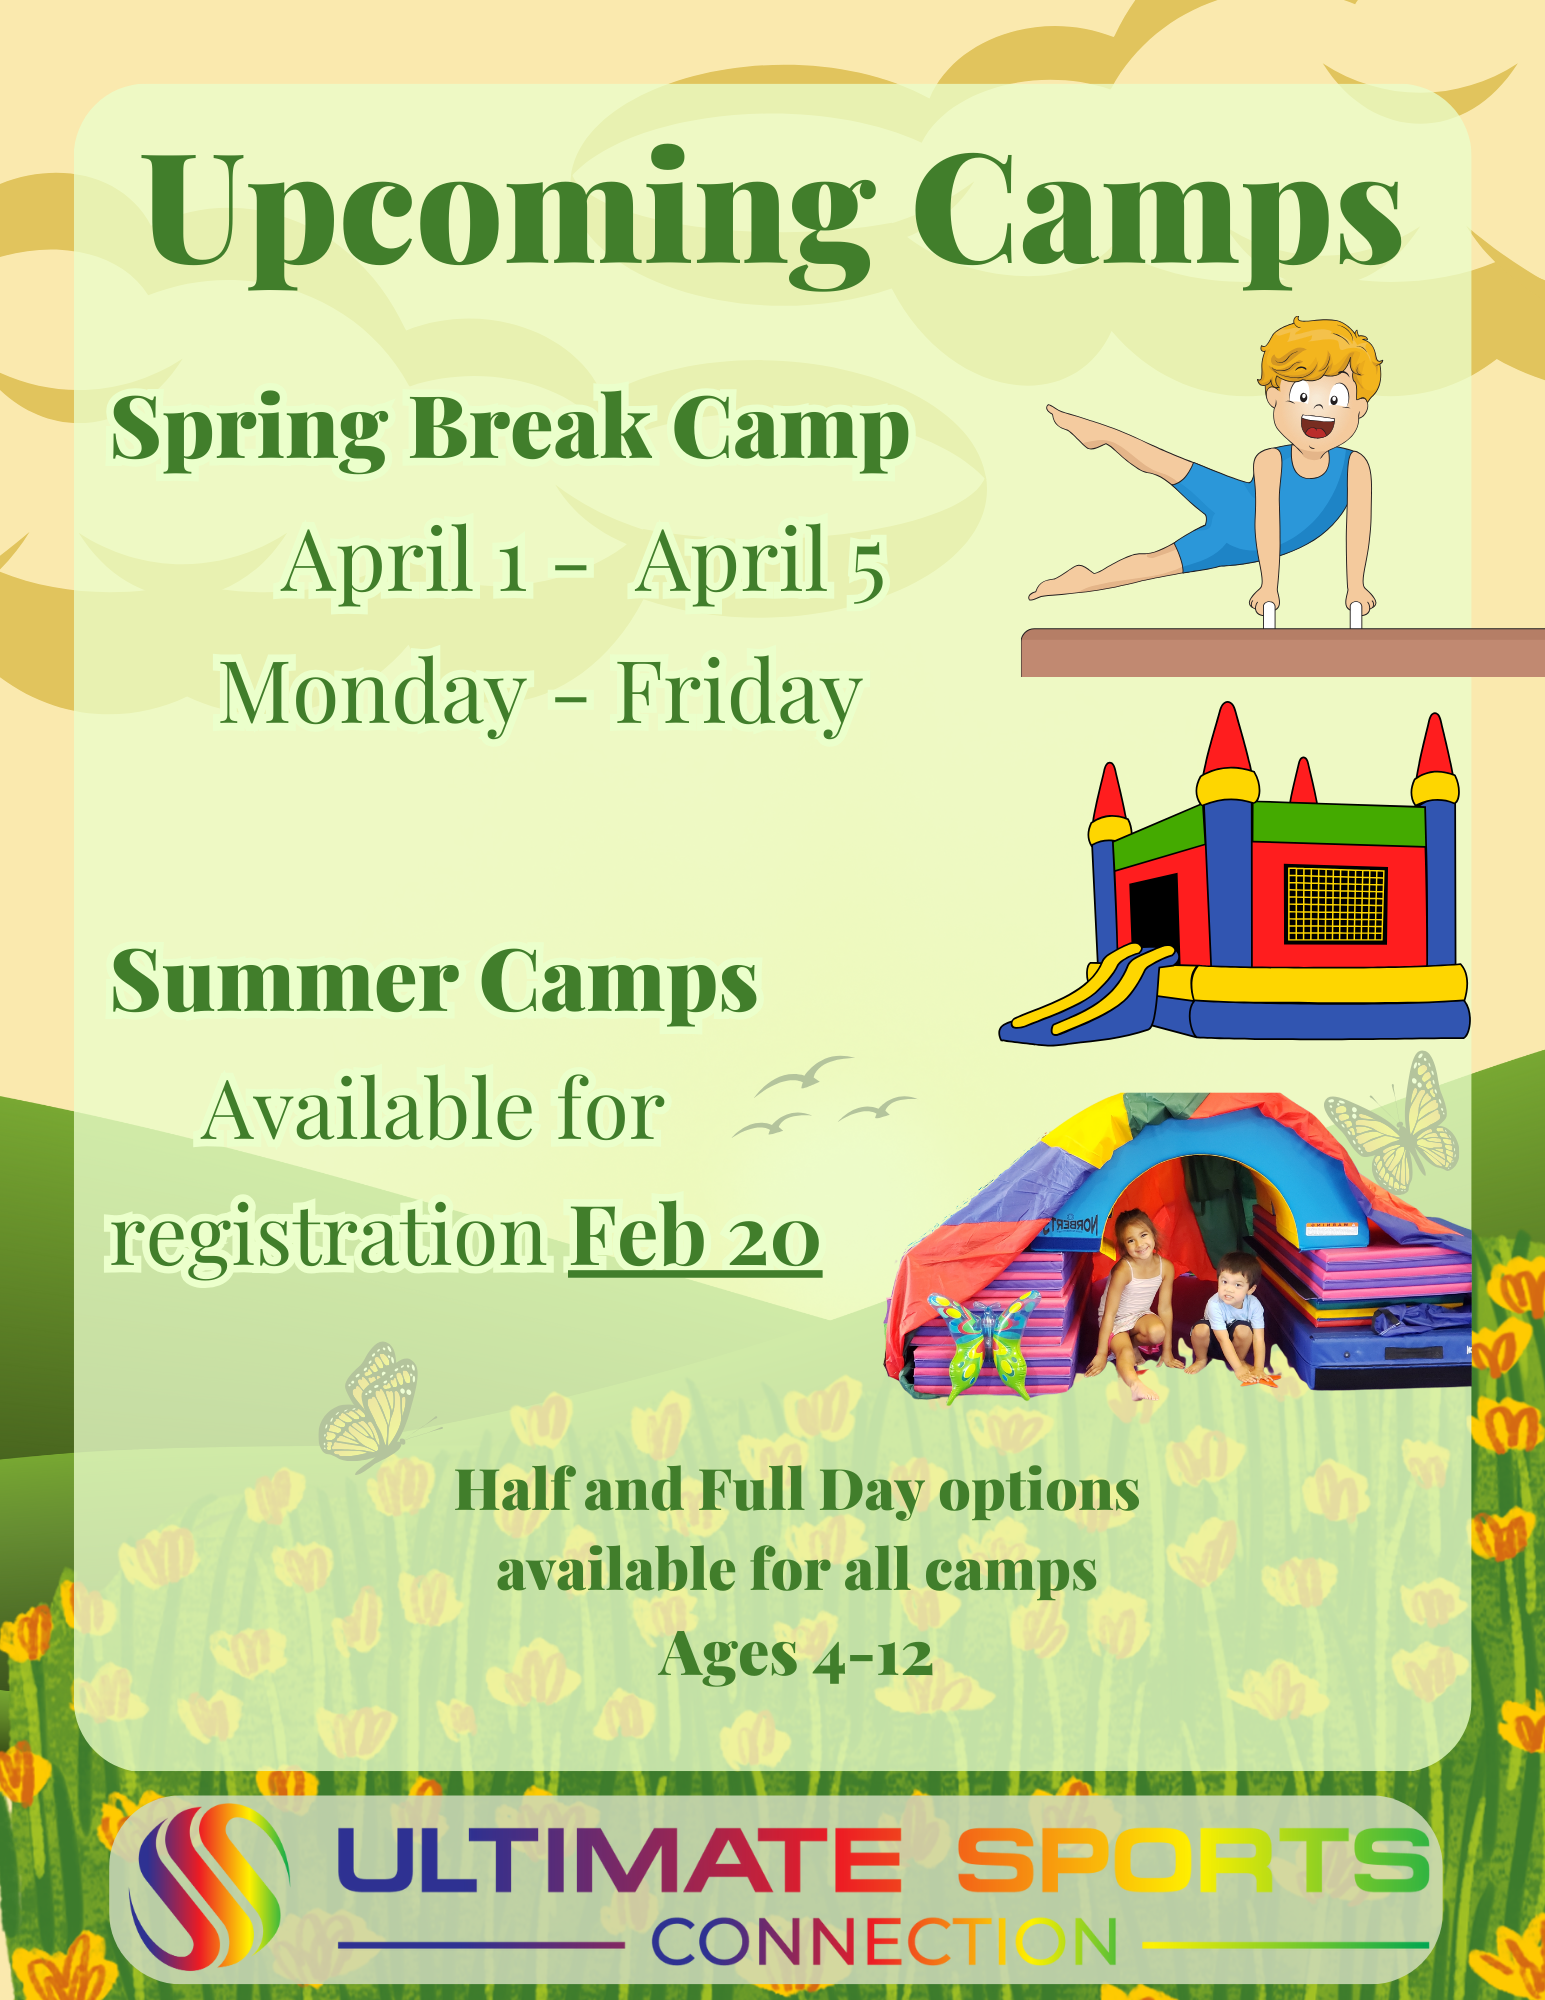 Upcoming Camps 8.5 x 11 (2)